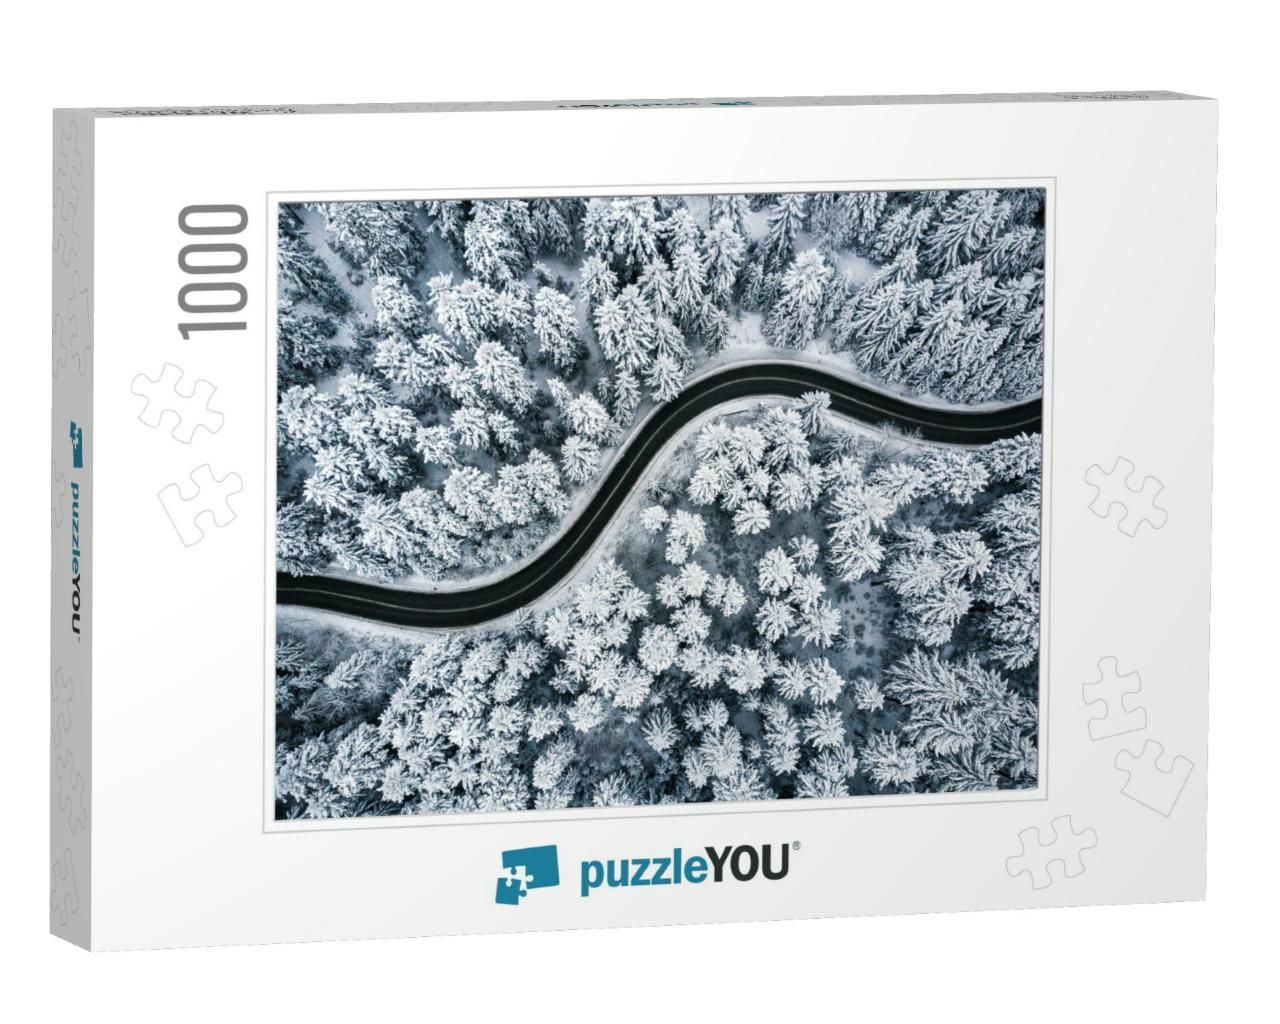 Curvy Windy Road in Snow Covered Forest, Top Down Aerial... Jigsaw Puzzle with 1000 pieces